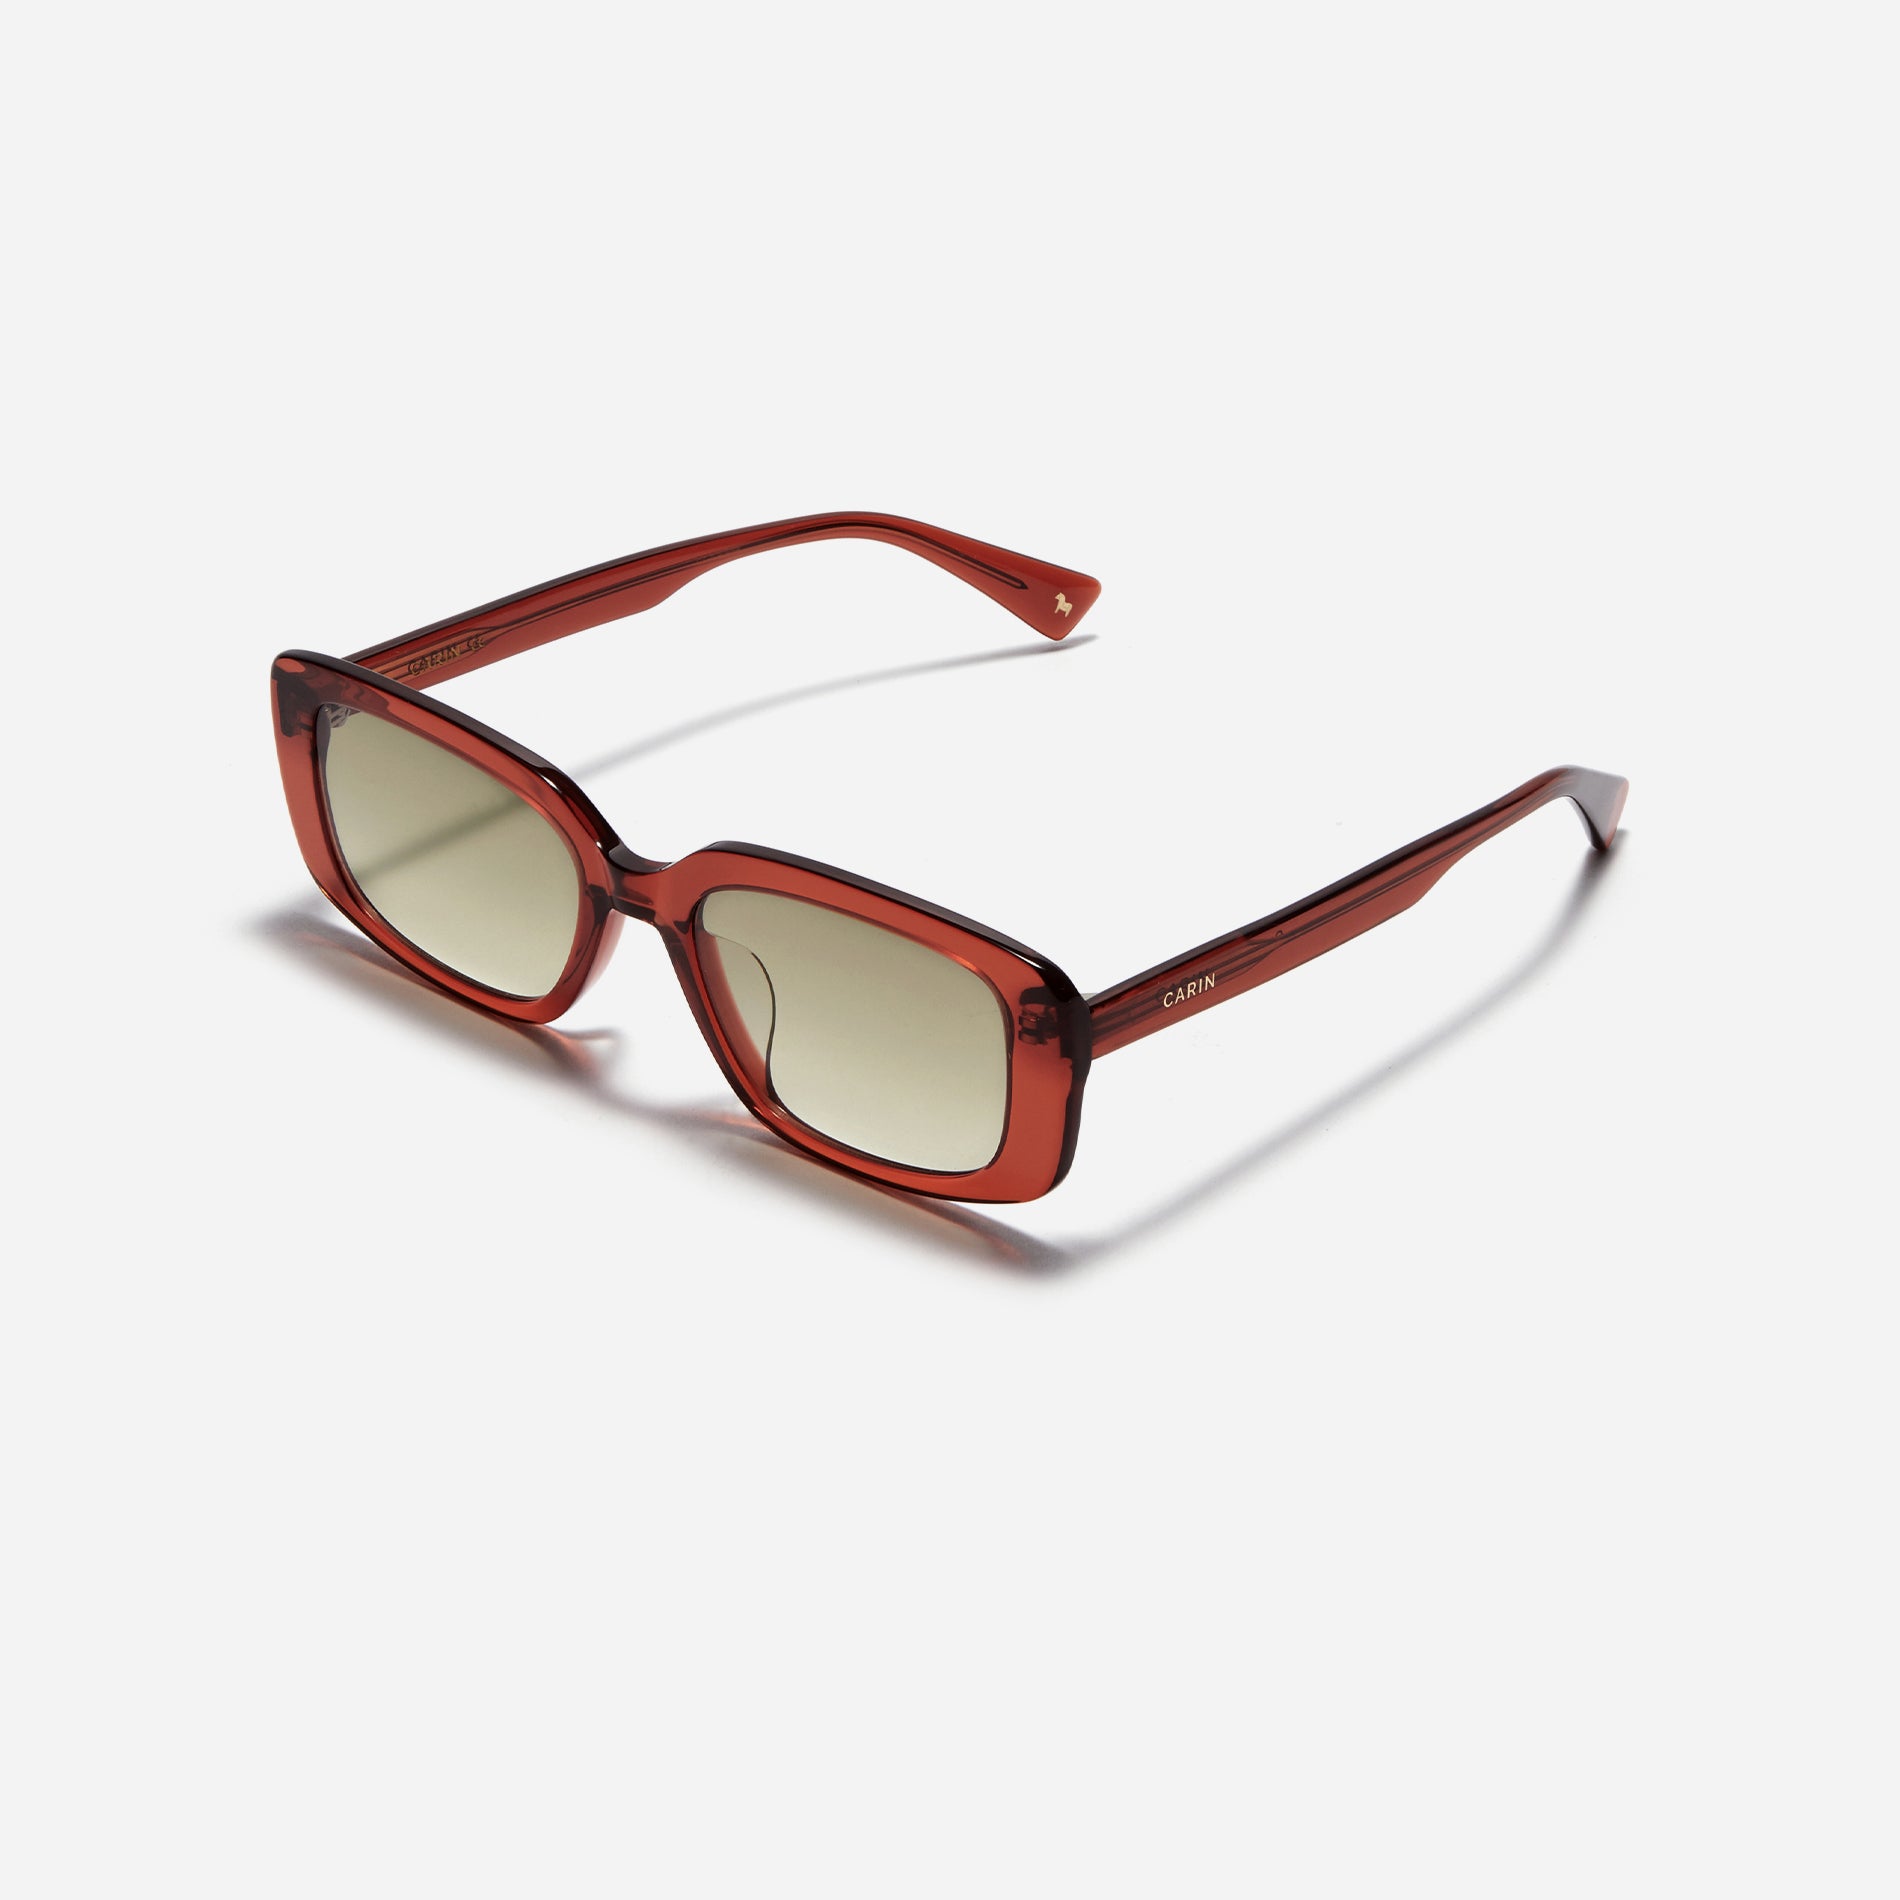 Square-shaped petite frame sunglasses. Crafted entirely from acetate material, these glasses offer robust durability that resists breakage. Cara features a unisex design that reinterprets the '80s retro style with a modern touch.